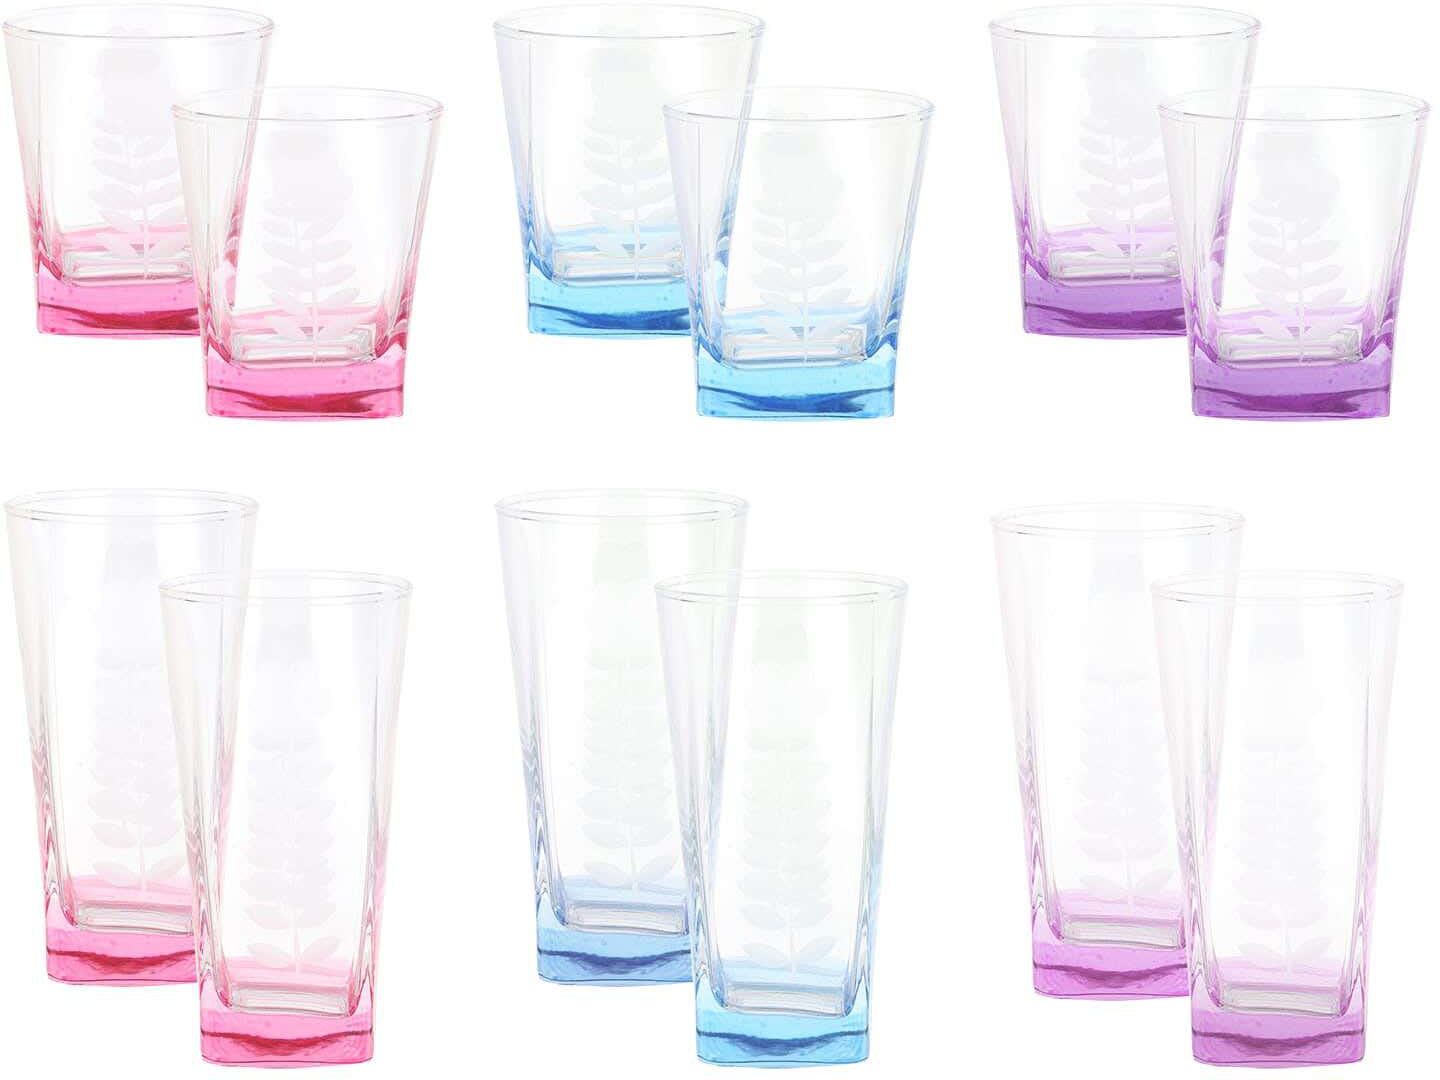 Get Bohemia Glass Set, 12 Pieces - Multicolor with best offers | Raneen.com